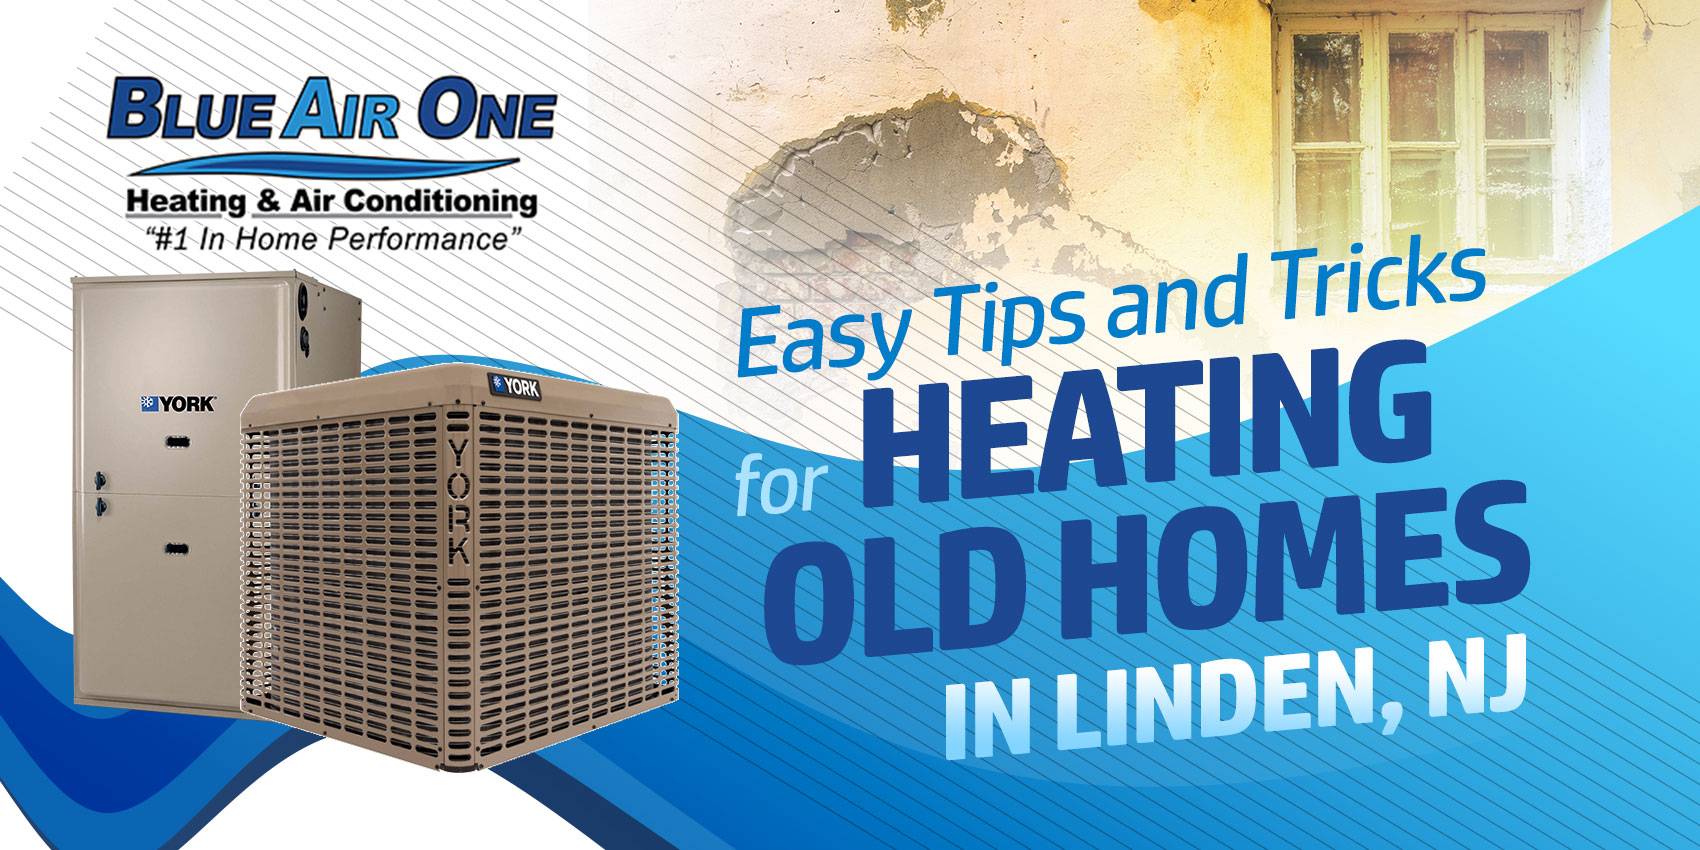 Easy Tips and Tricks for Heating Old Homes in Linden, NJ